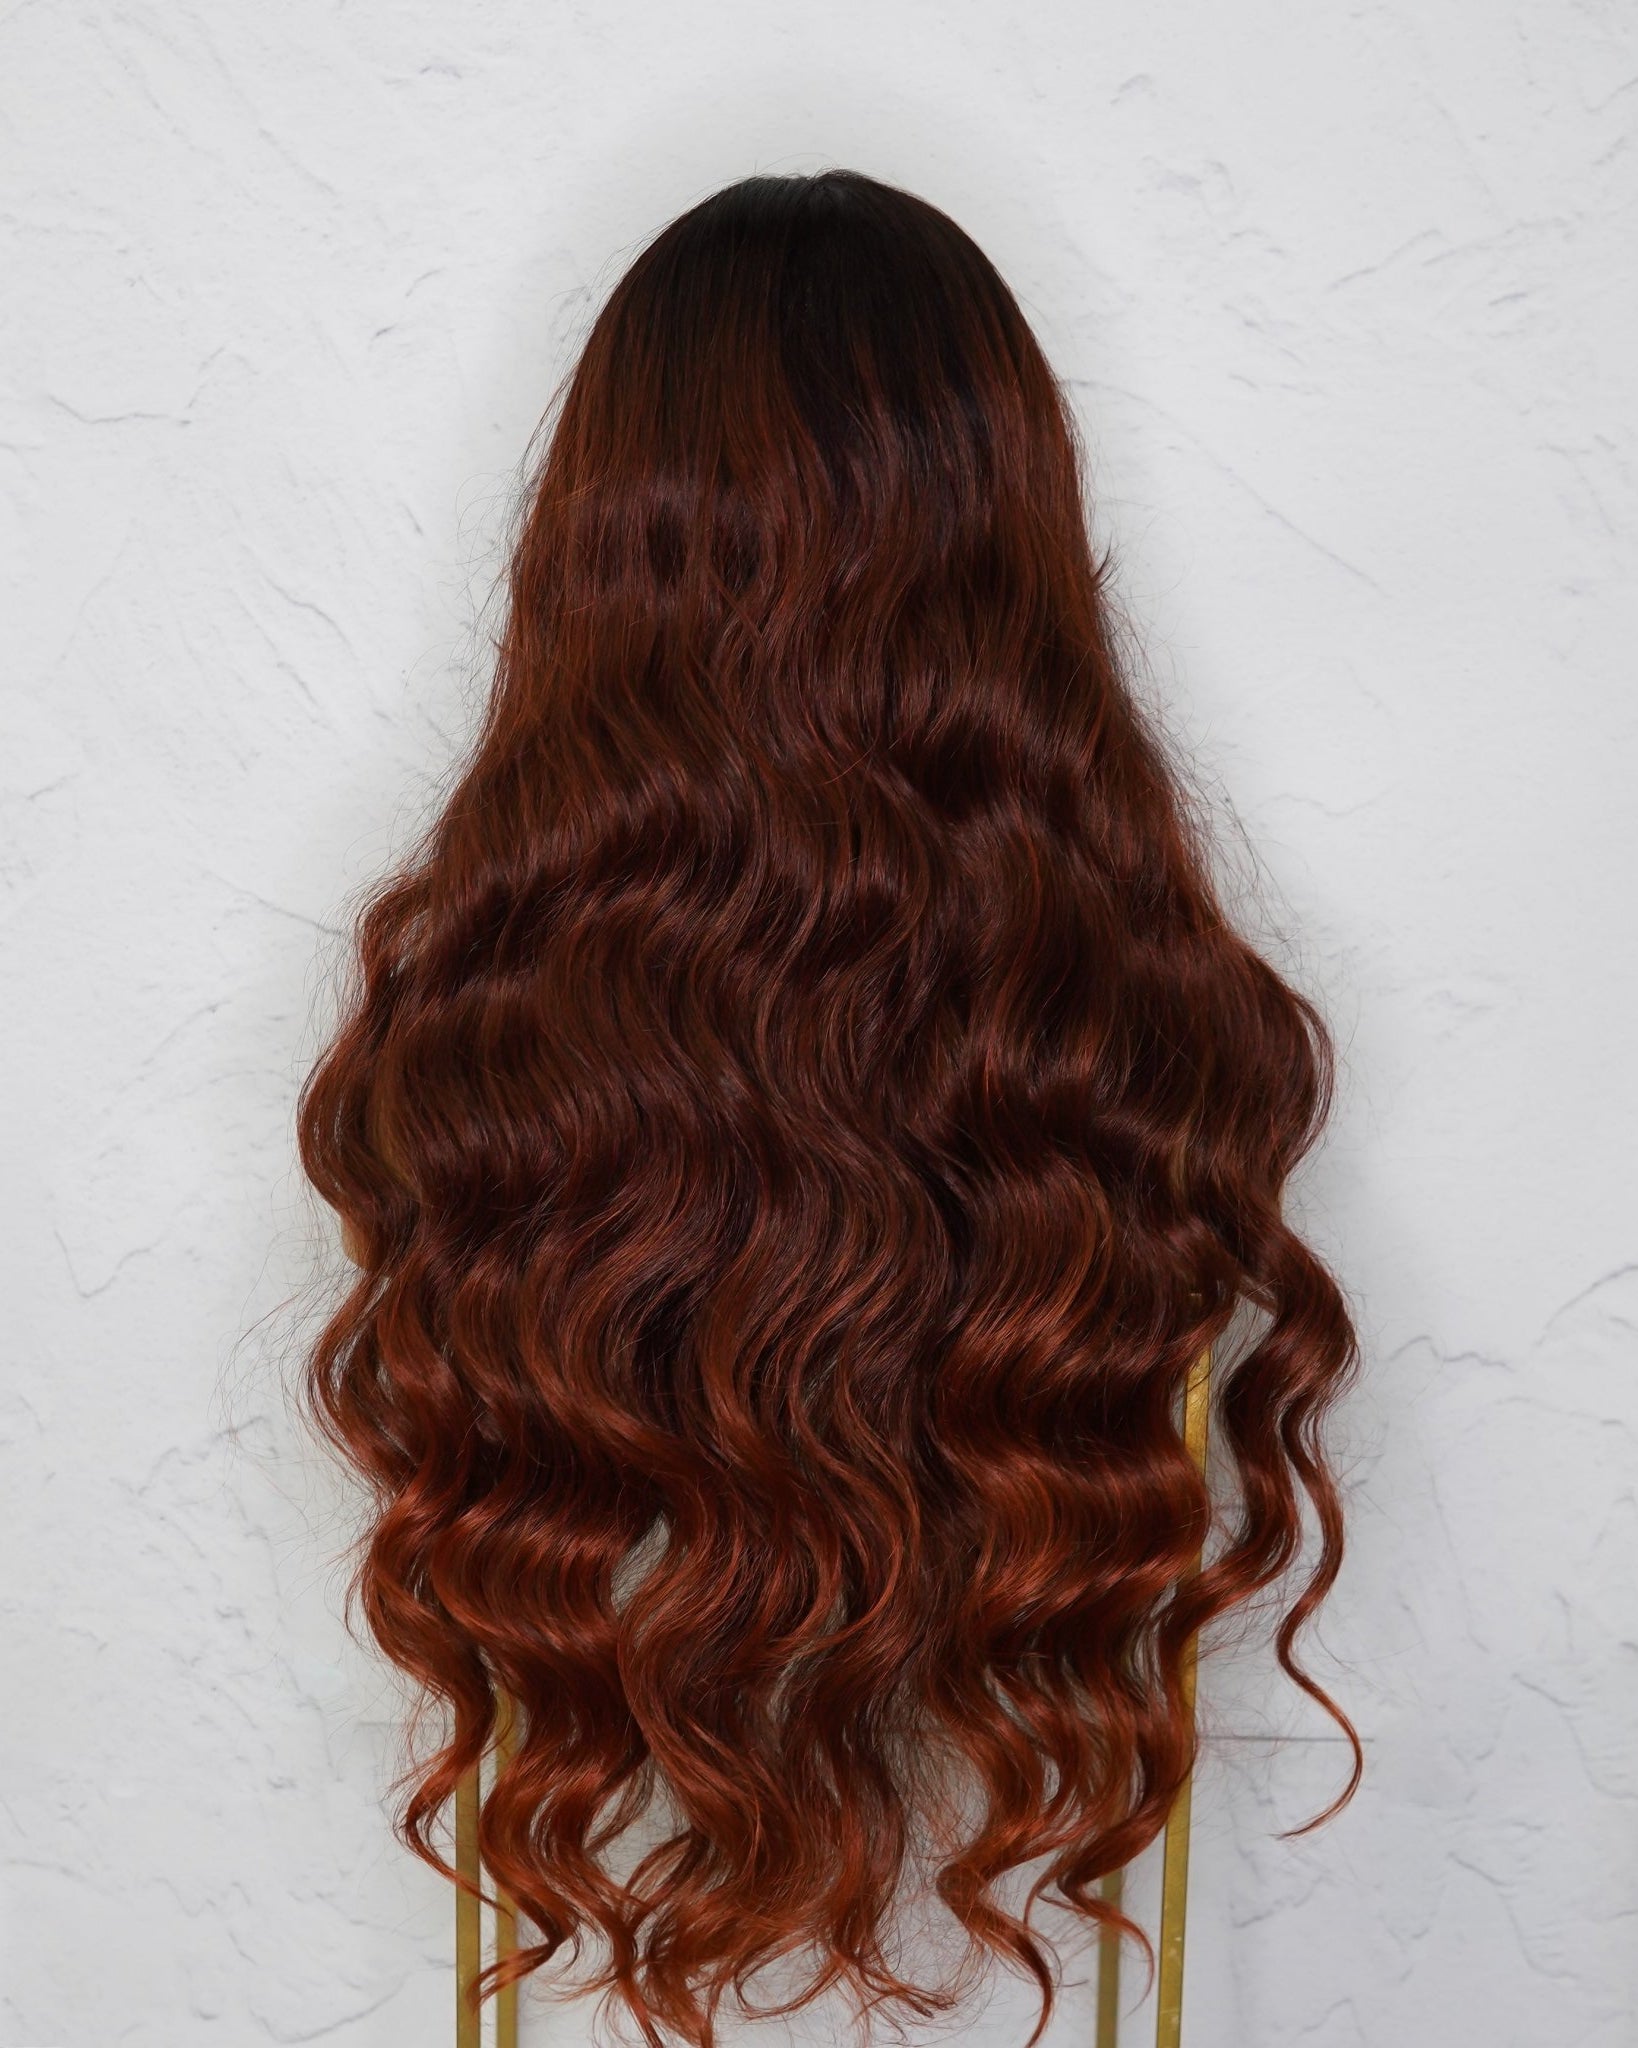 PIPER Burgundy Lace Front Wig - Milk & Honey